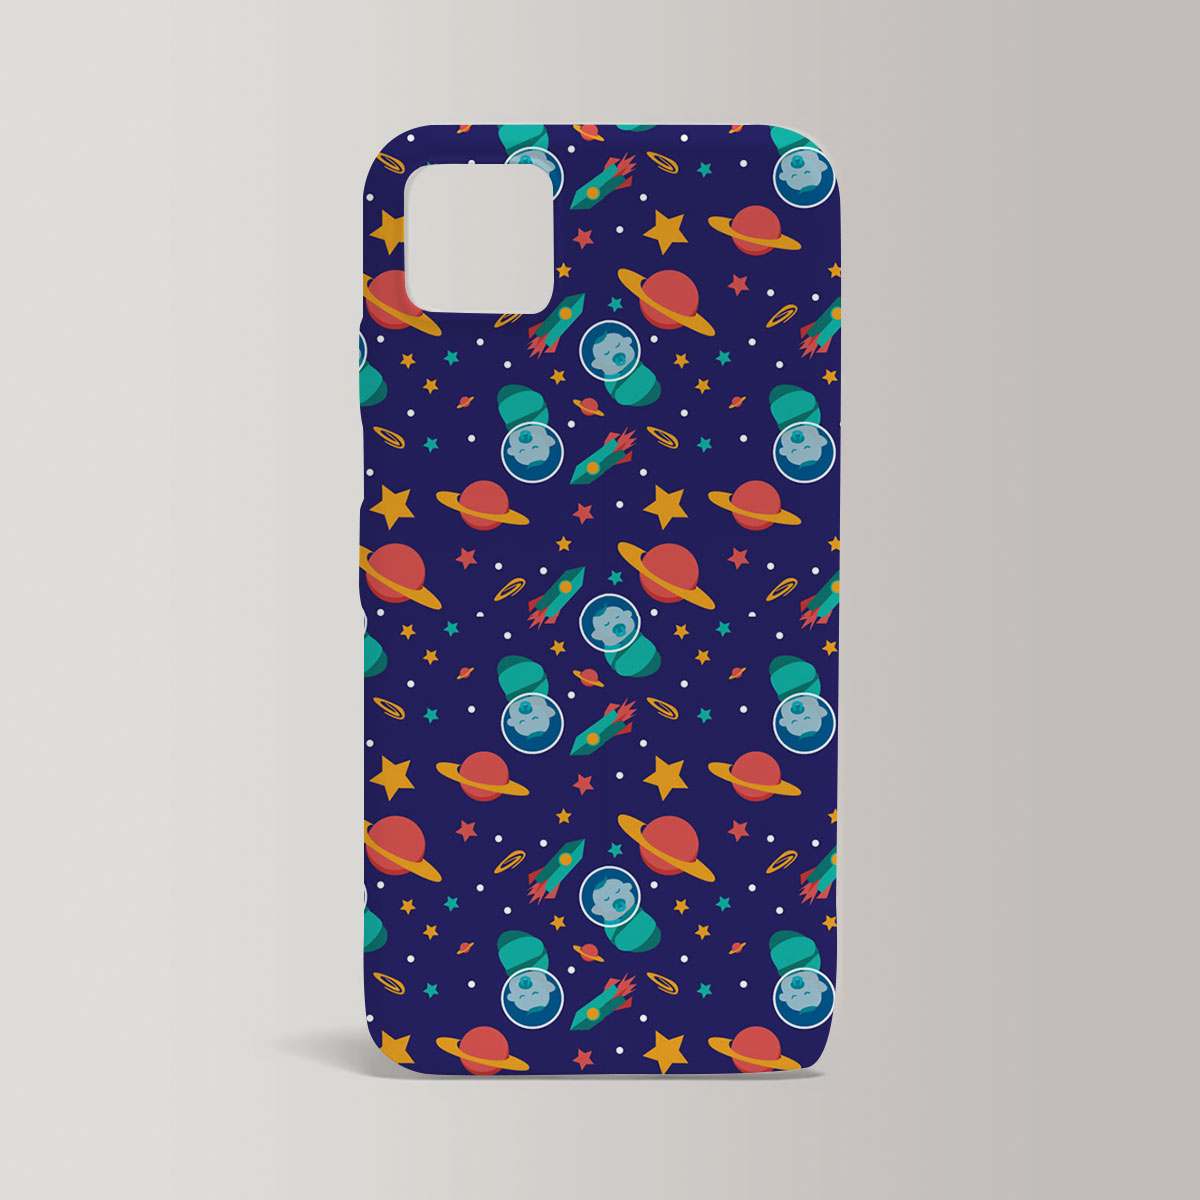 Galaxy Background With Baby Astronauts Iphone Case